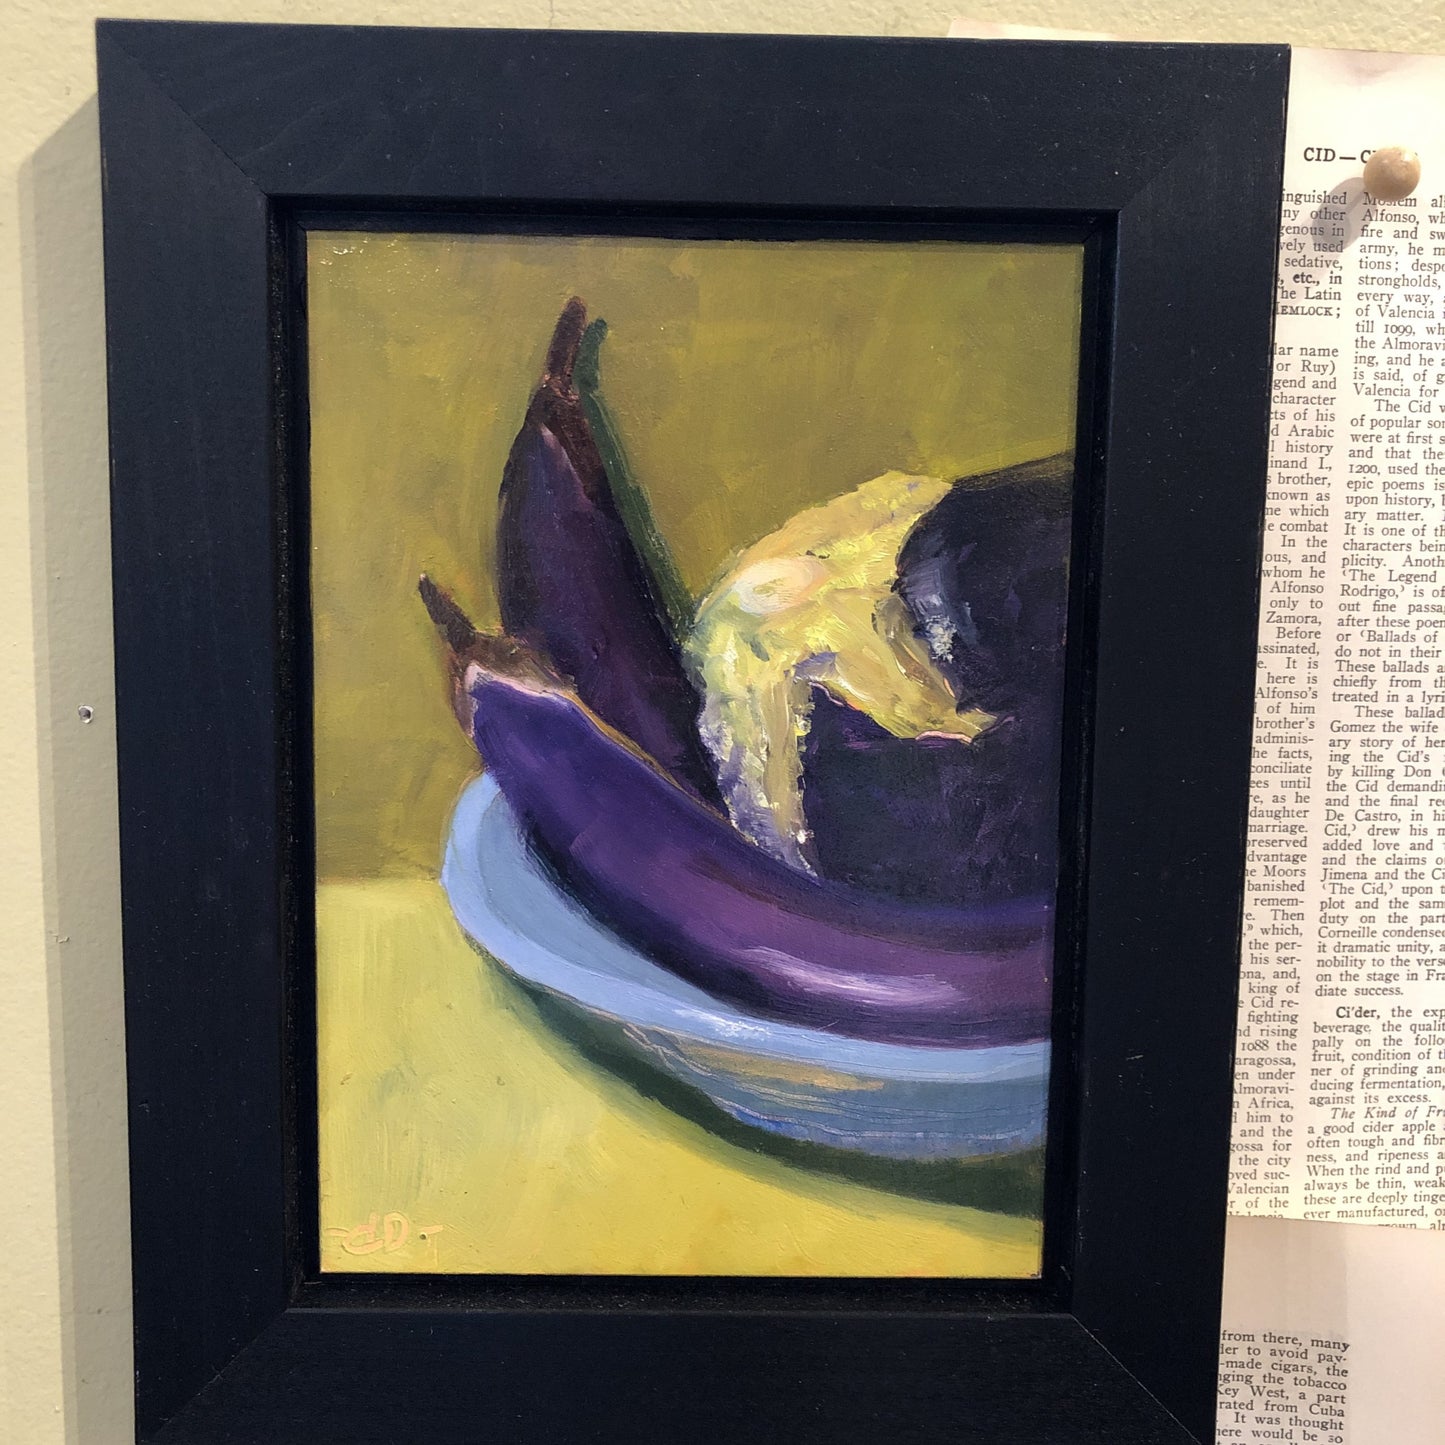 Eggplants by Donna Dumont